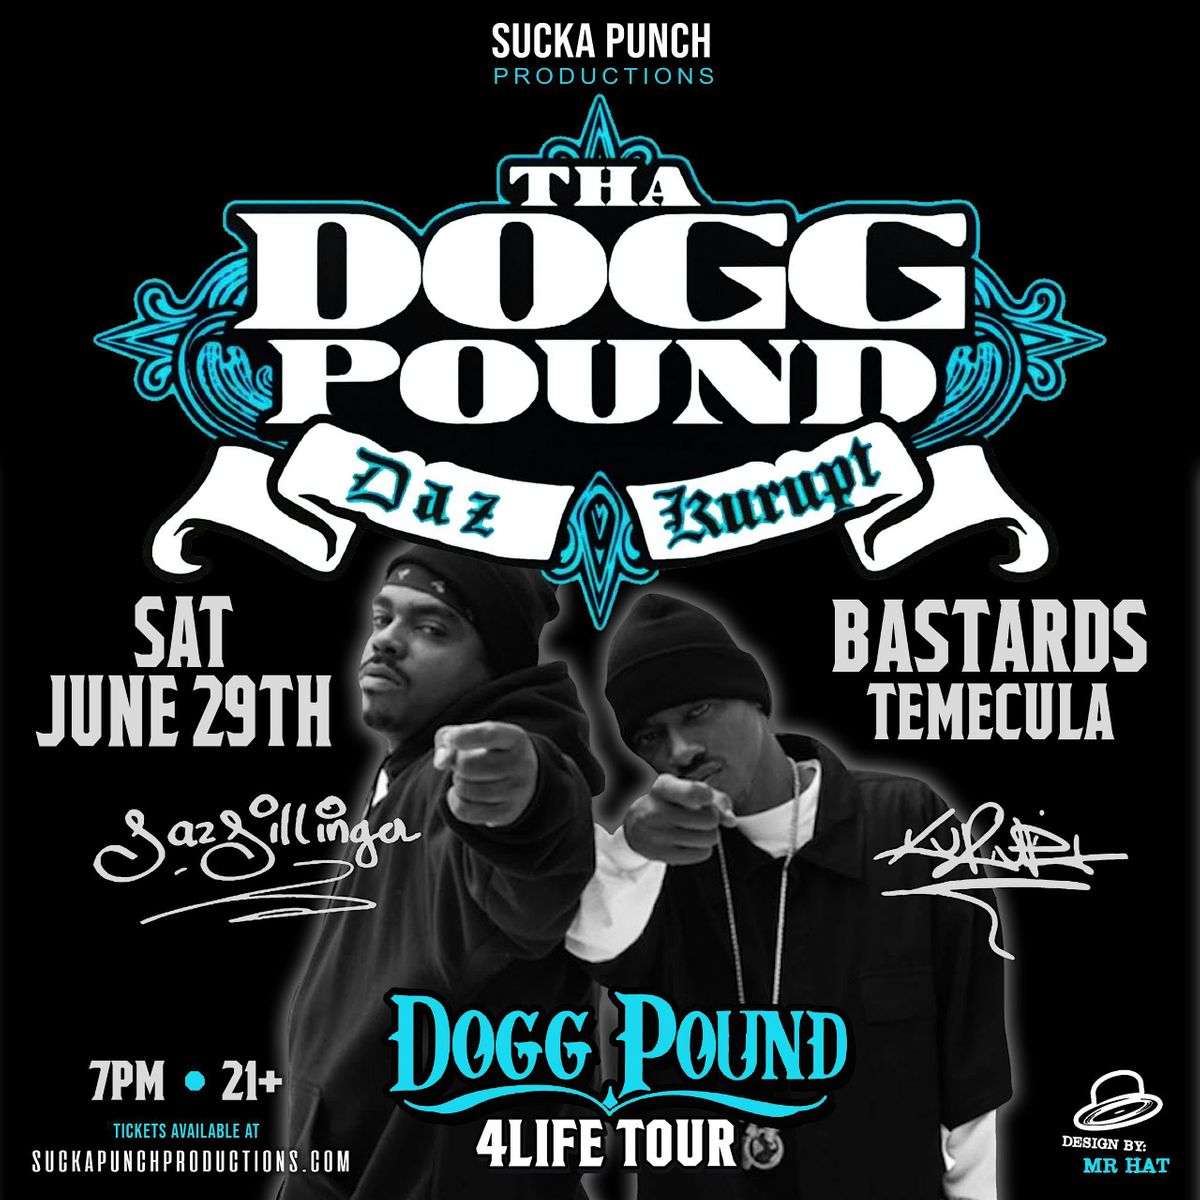 Sucka Punch Productions THA DOGG POUND DAZ & KURUPT LIVE IN CONCERT AT BAST